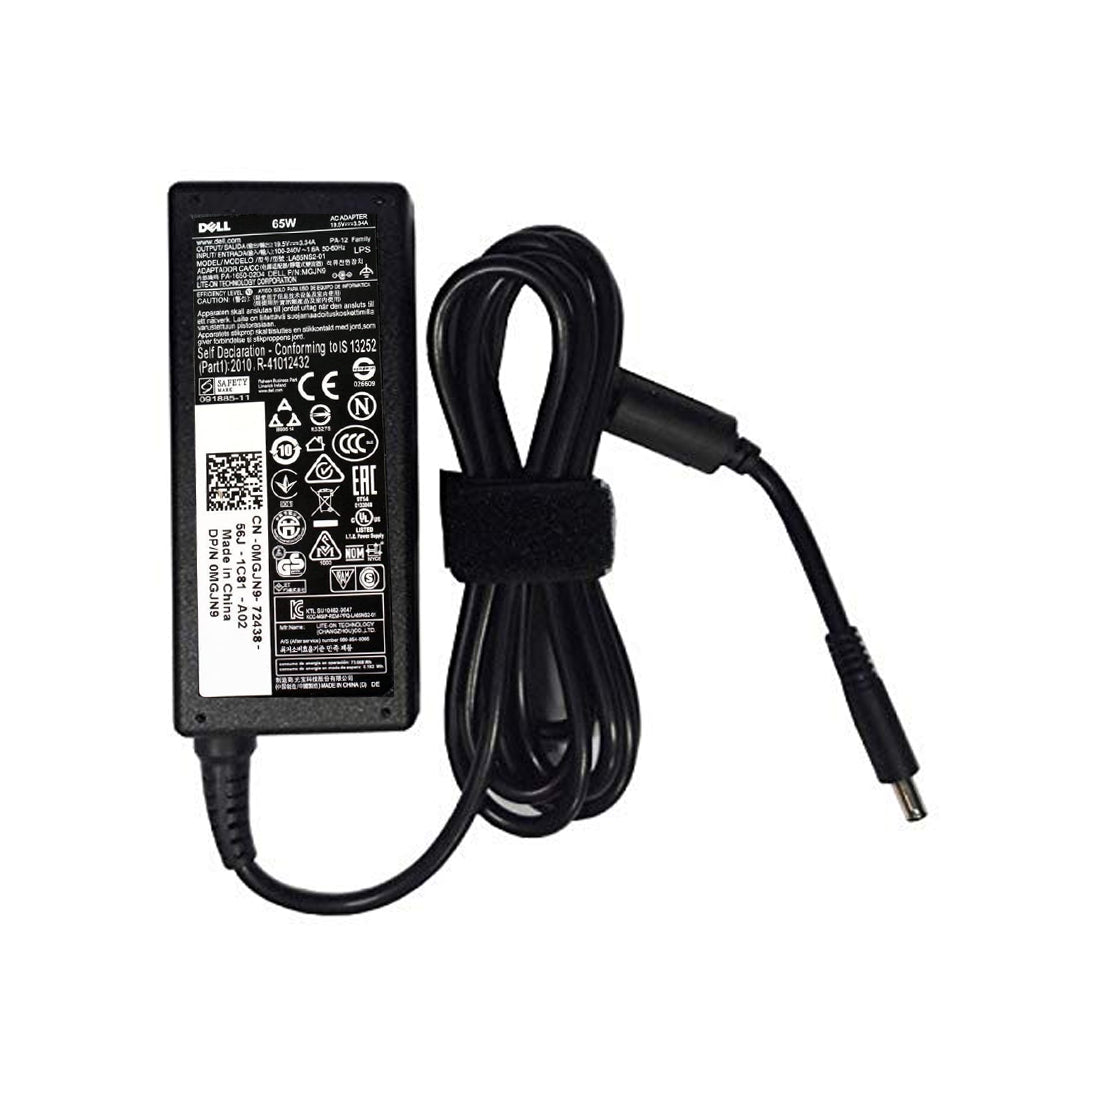 Dell Original 65W 19.5V 4.5mm Pin Laptop Charger Adapter for Inspiron 15 3568 With Power Cord